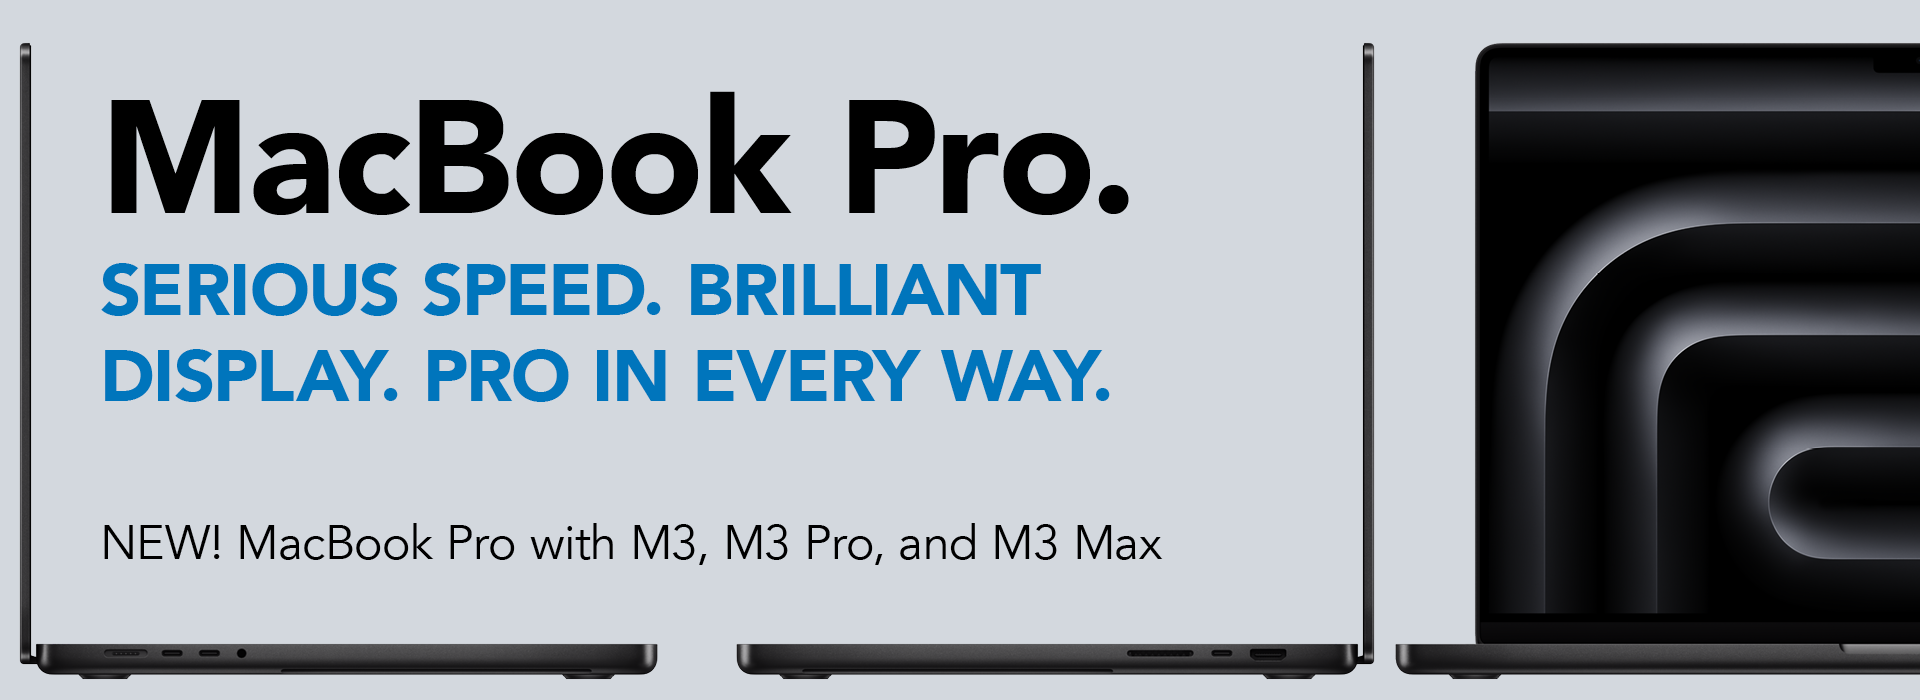 new MacBook Pro now available